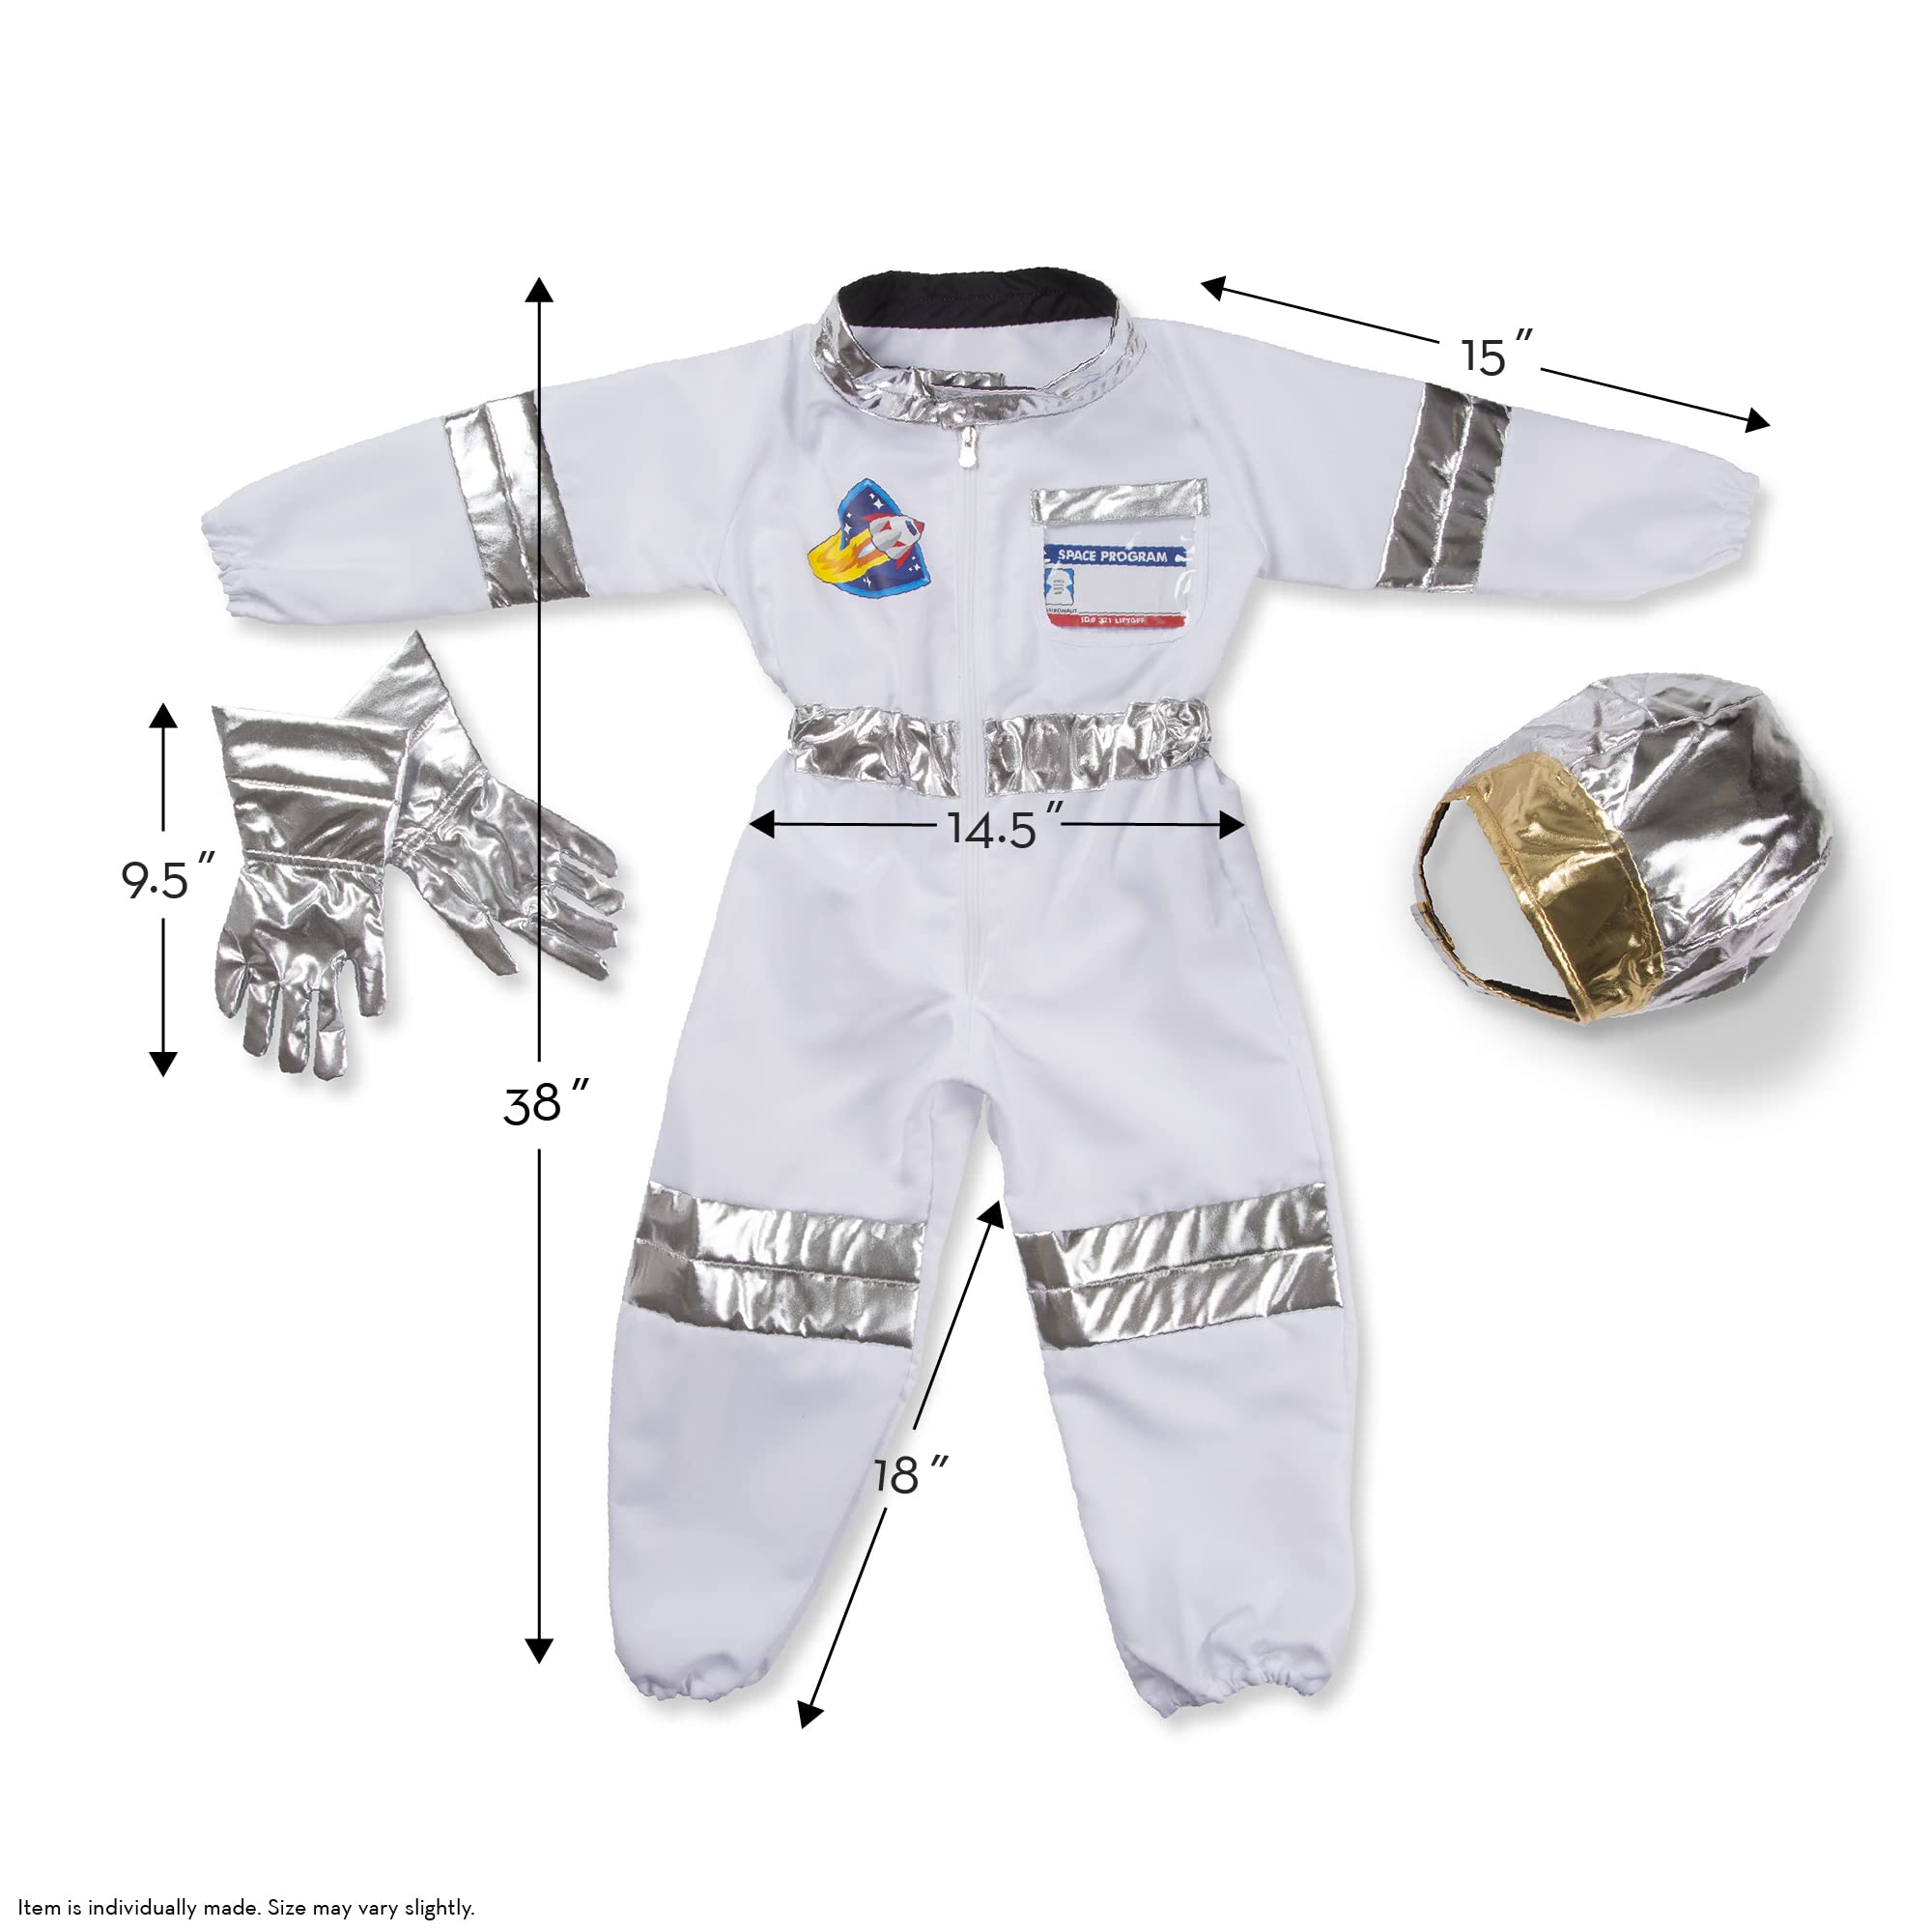 Melissa & Doug Astronaut Costume Role Play Set - Pretend Astronaut Outfit With Realistic Accessories, Astronaut Costume For Kids And Toddlers Ages 3+